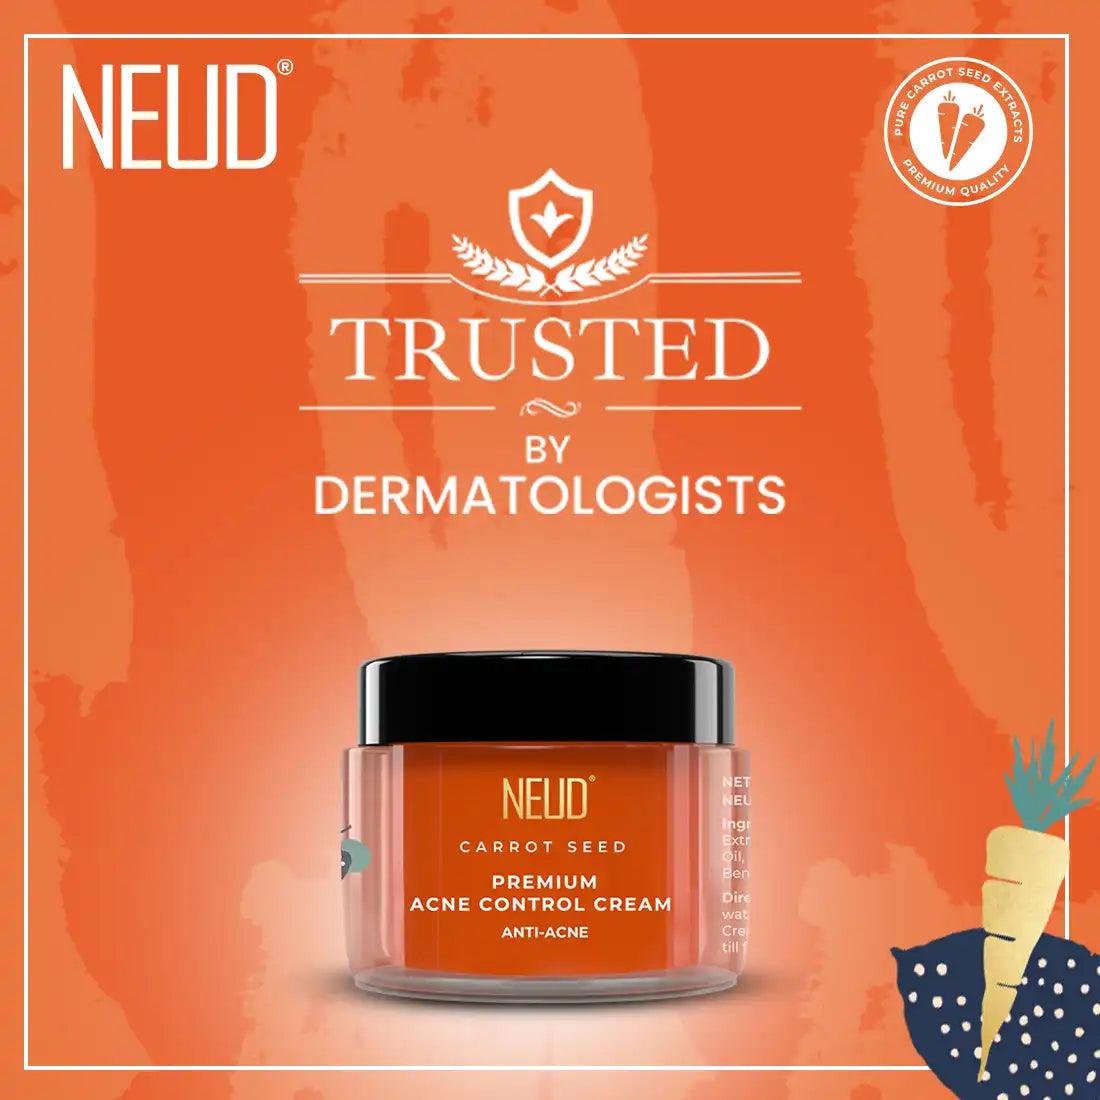 NEUD Carrot Seed Acne Control Cream is Trusted By Dermatologists - everteen-neud.com